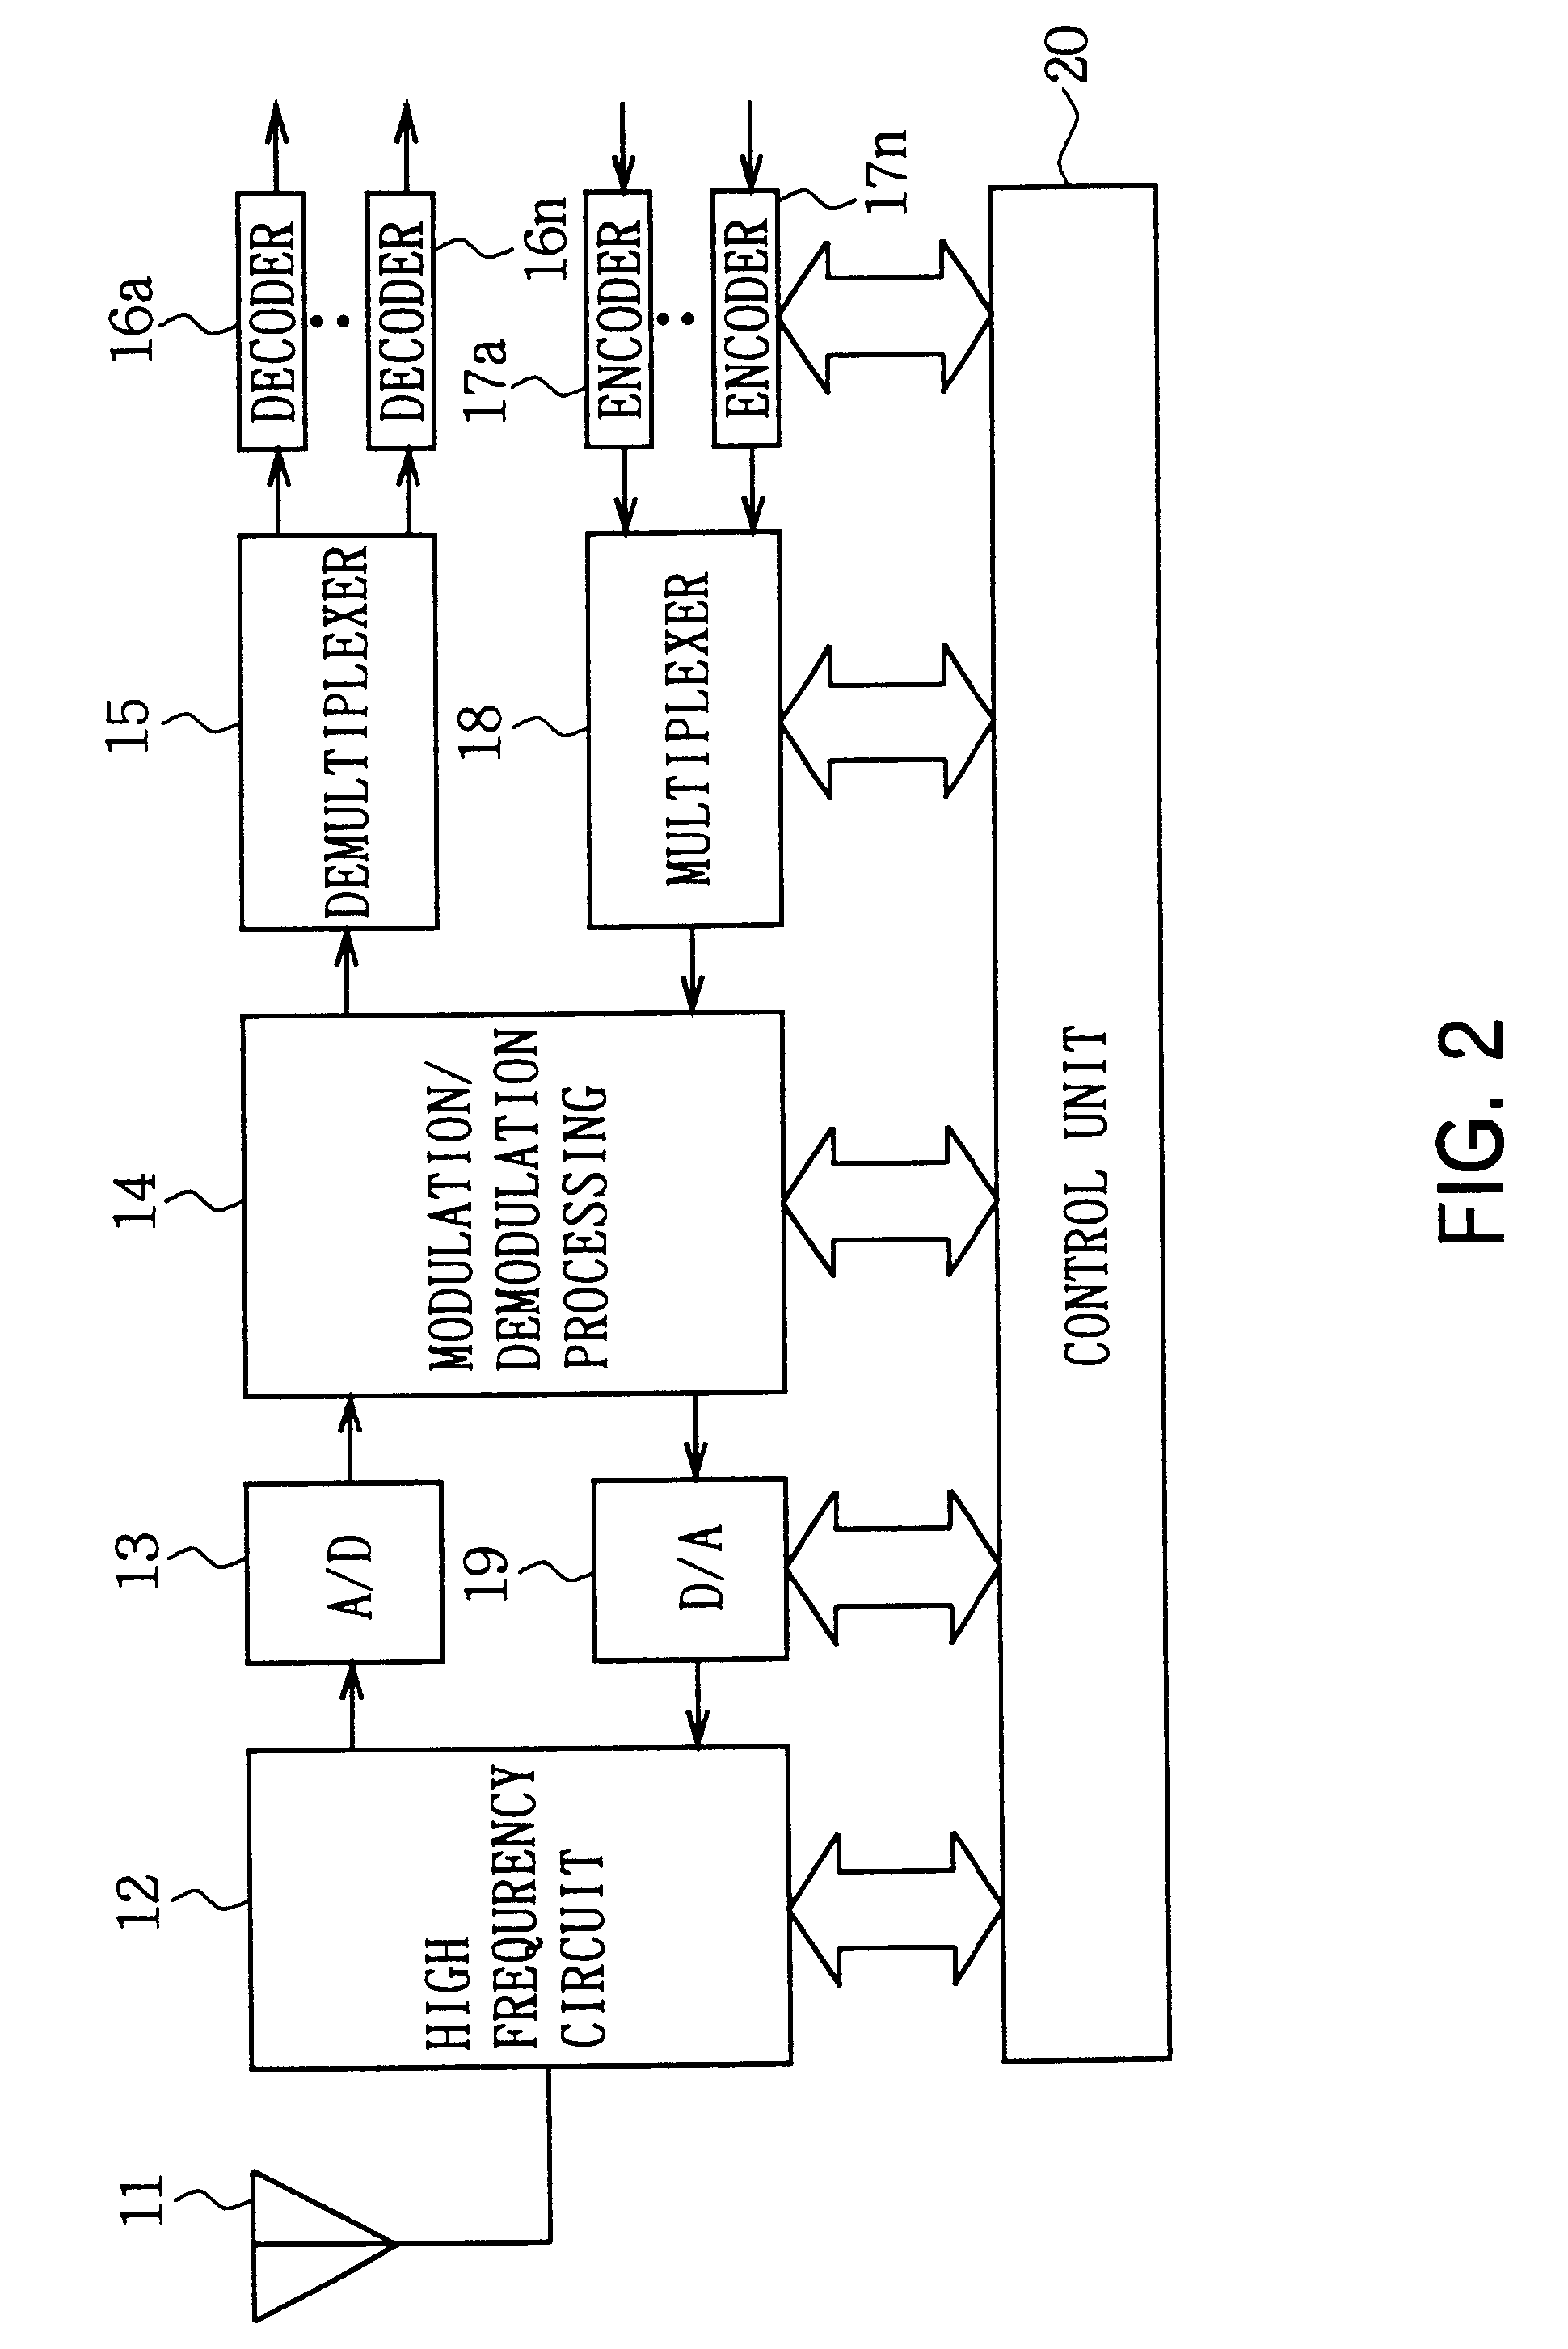 Communication method and apparatus in which first and second control channels operate as an initial acquisition channel and a broadcast channel, respectively